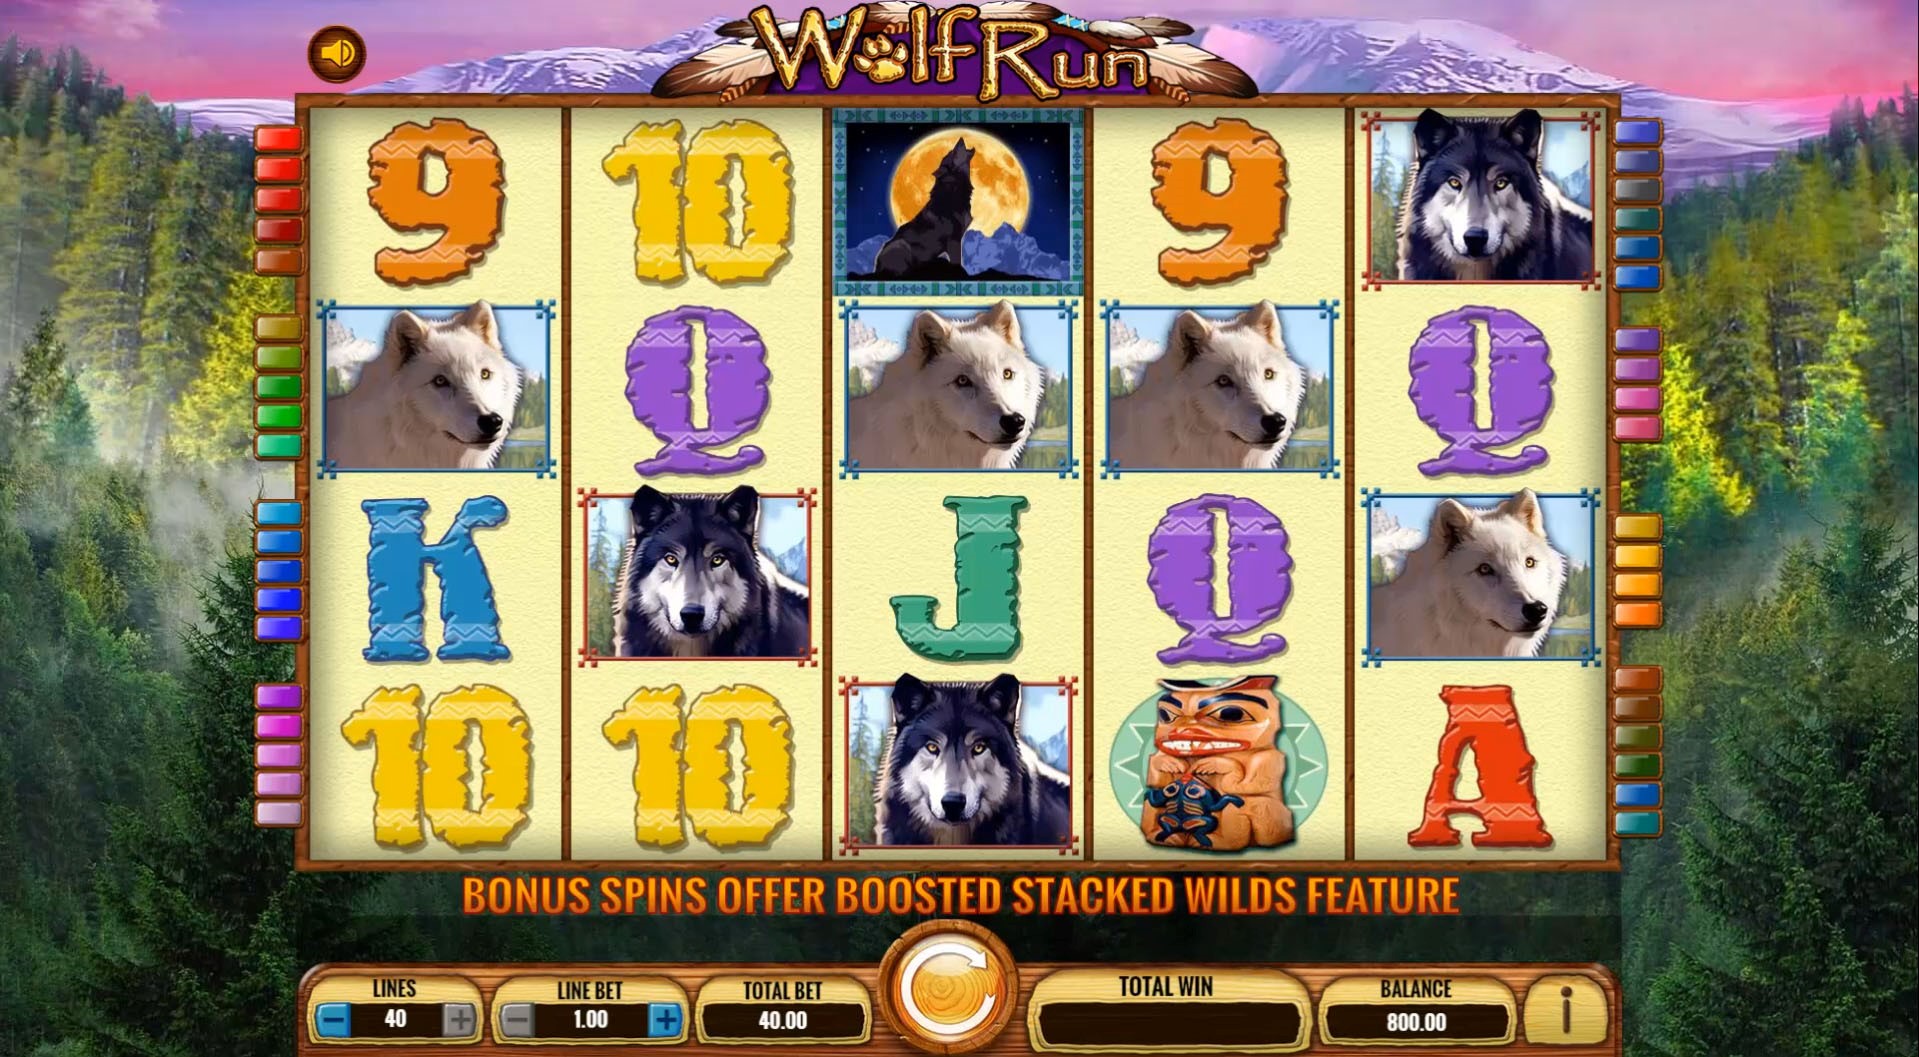 Bet up to 40 lines in PlayOJO’s Wolf Run online slot game from game provider IGT